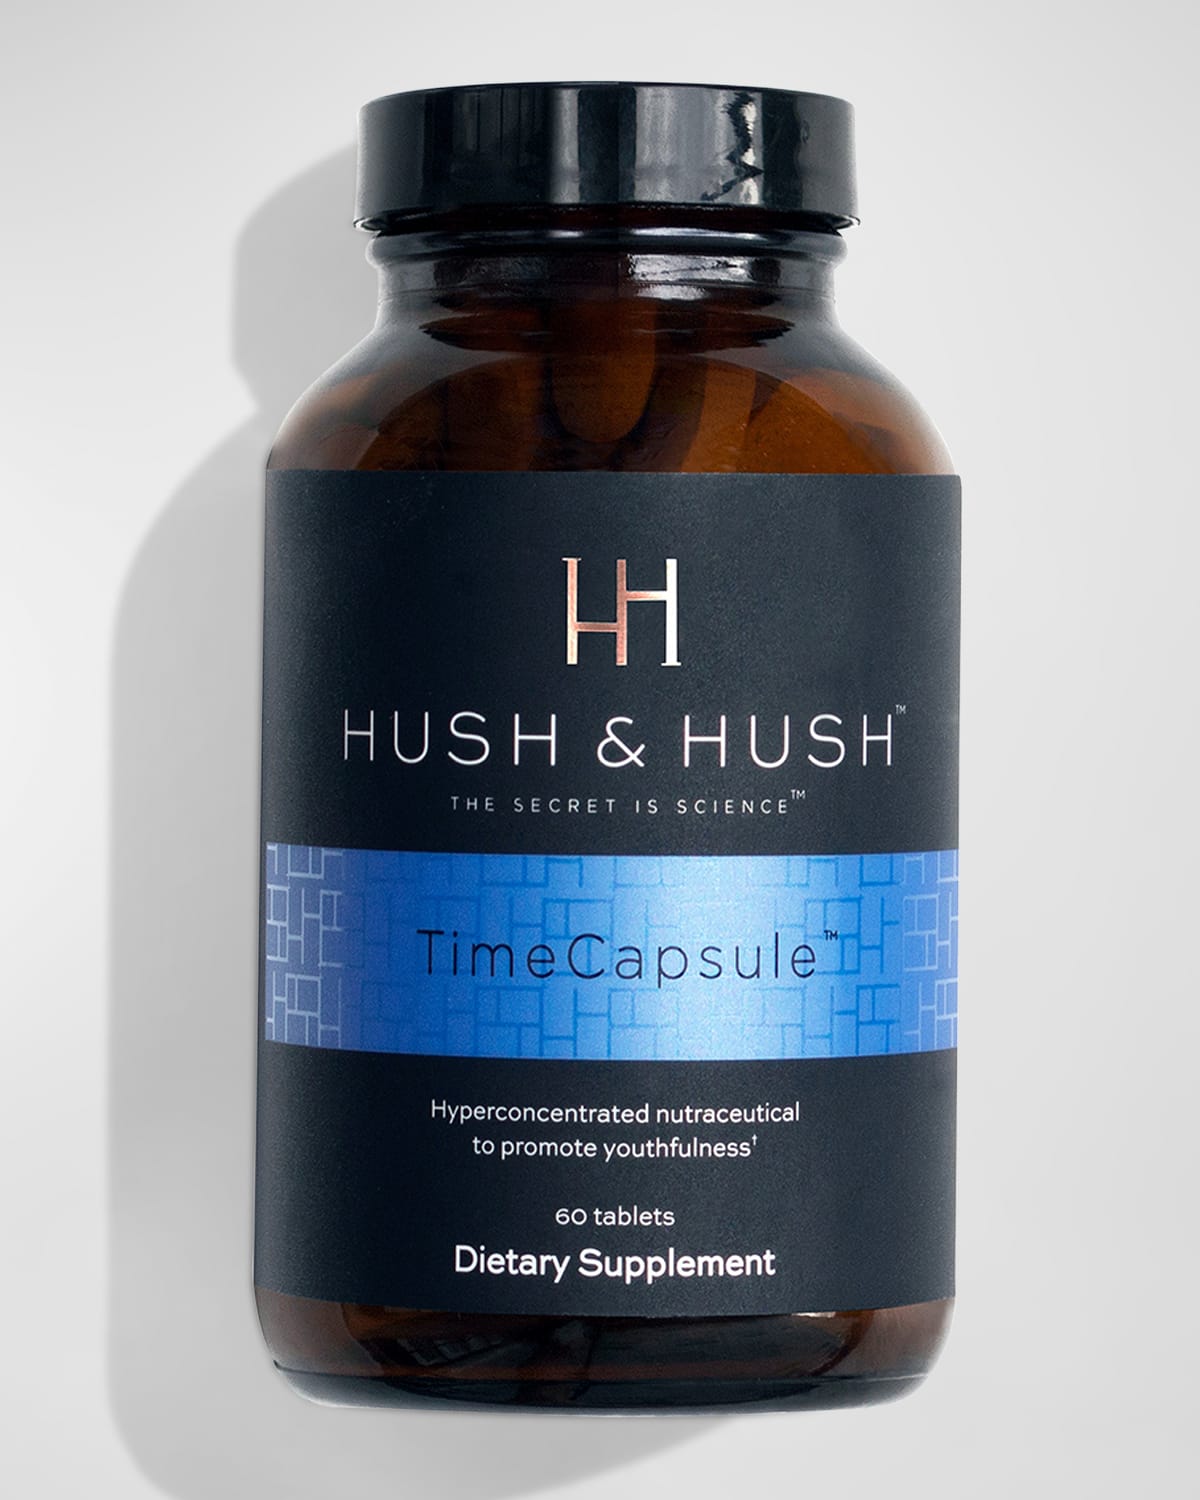 TimeCapsule Supplement - 60 Tablets